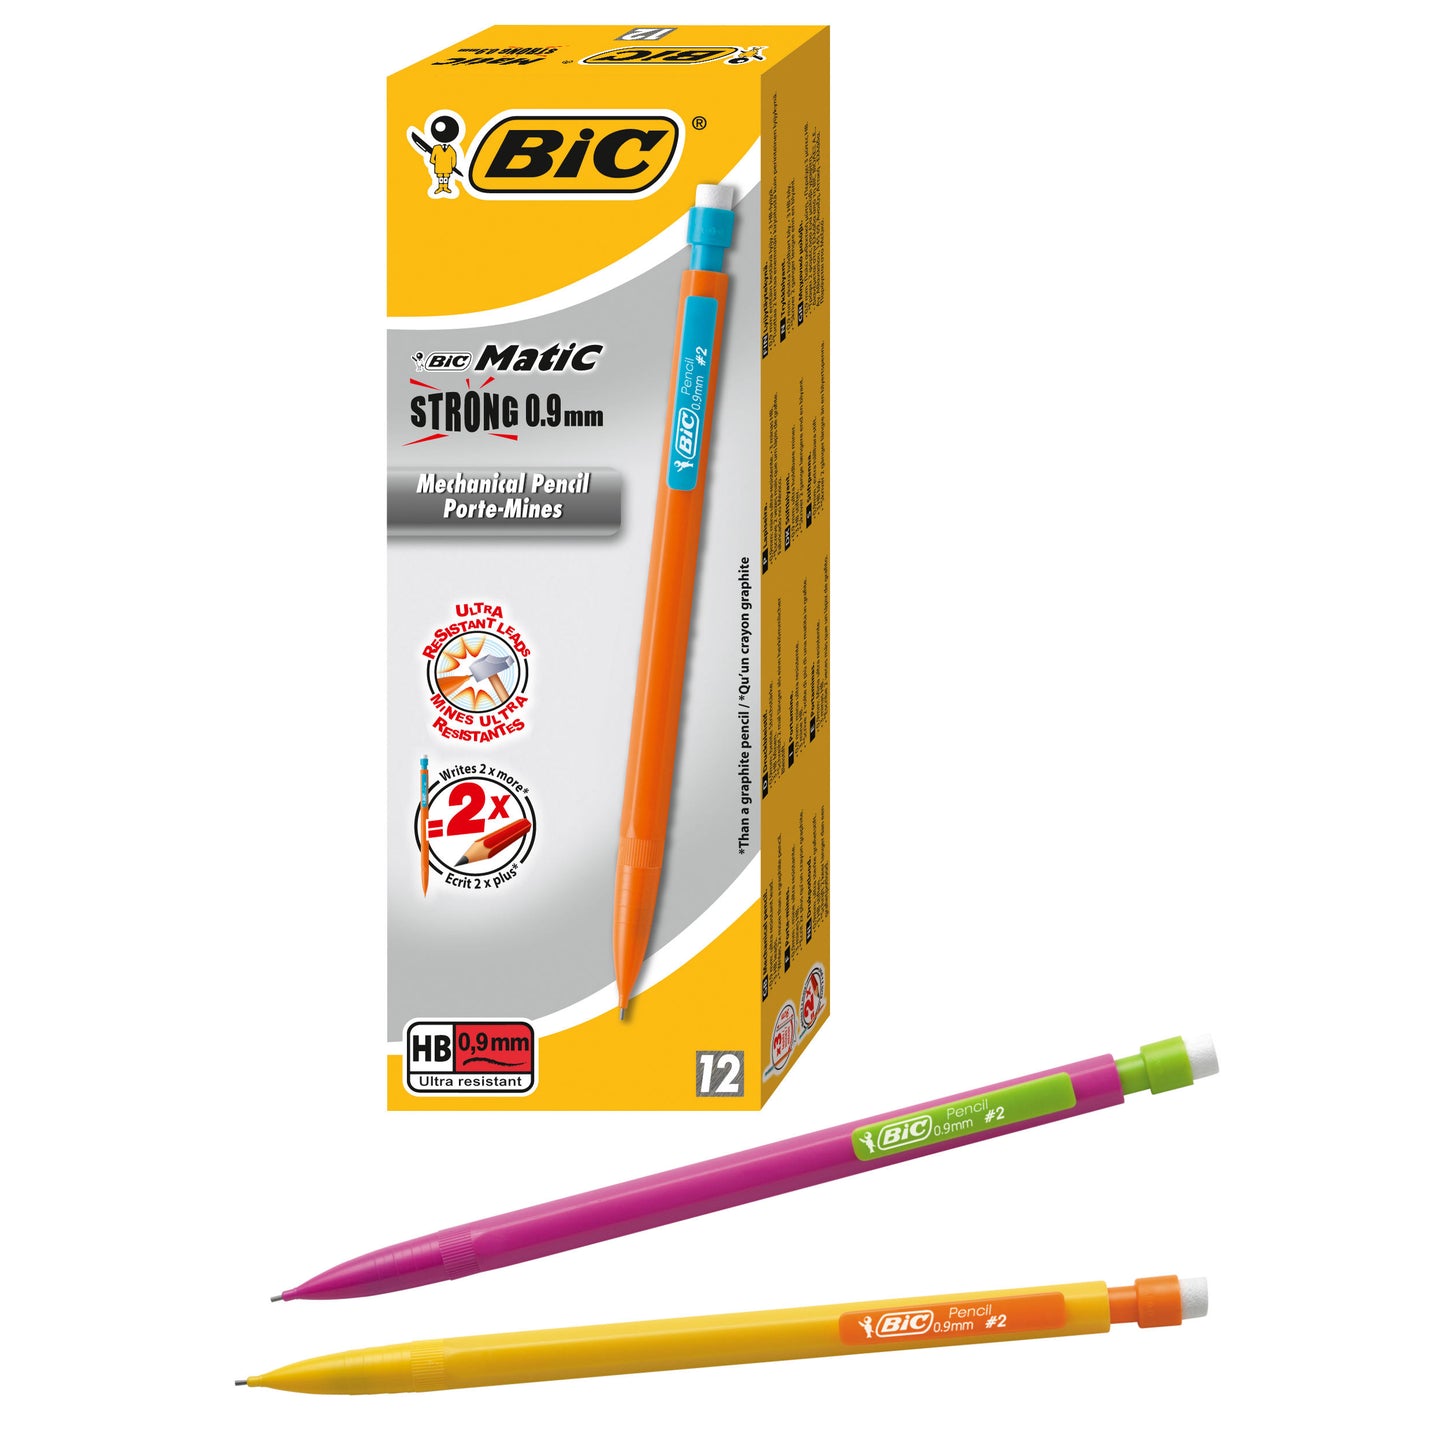 Bicmatic Strong Mech Pencil 0.9mm 892271 Pack Of 12